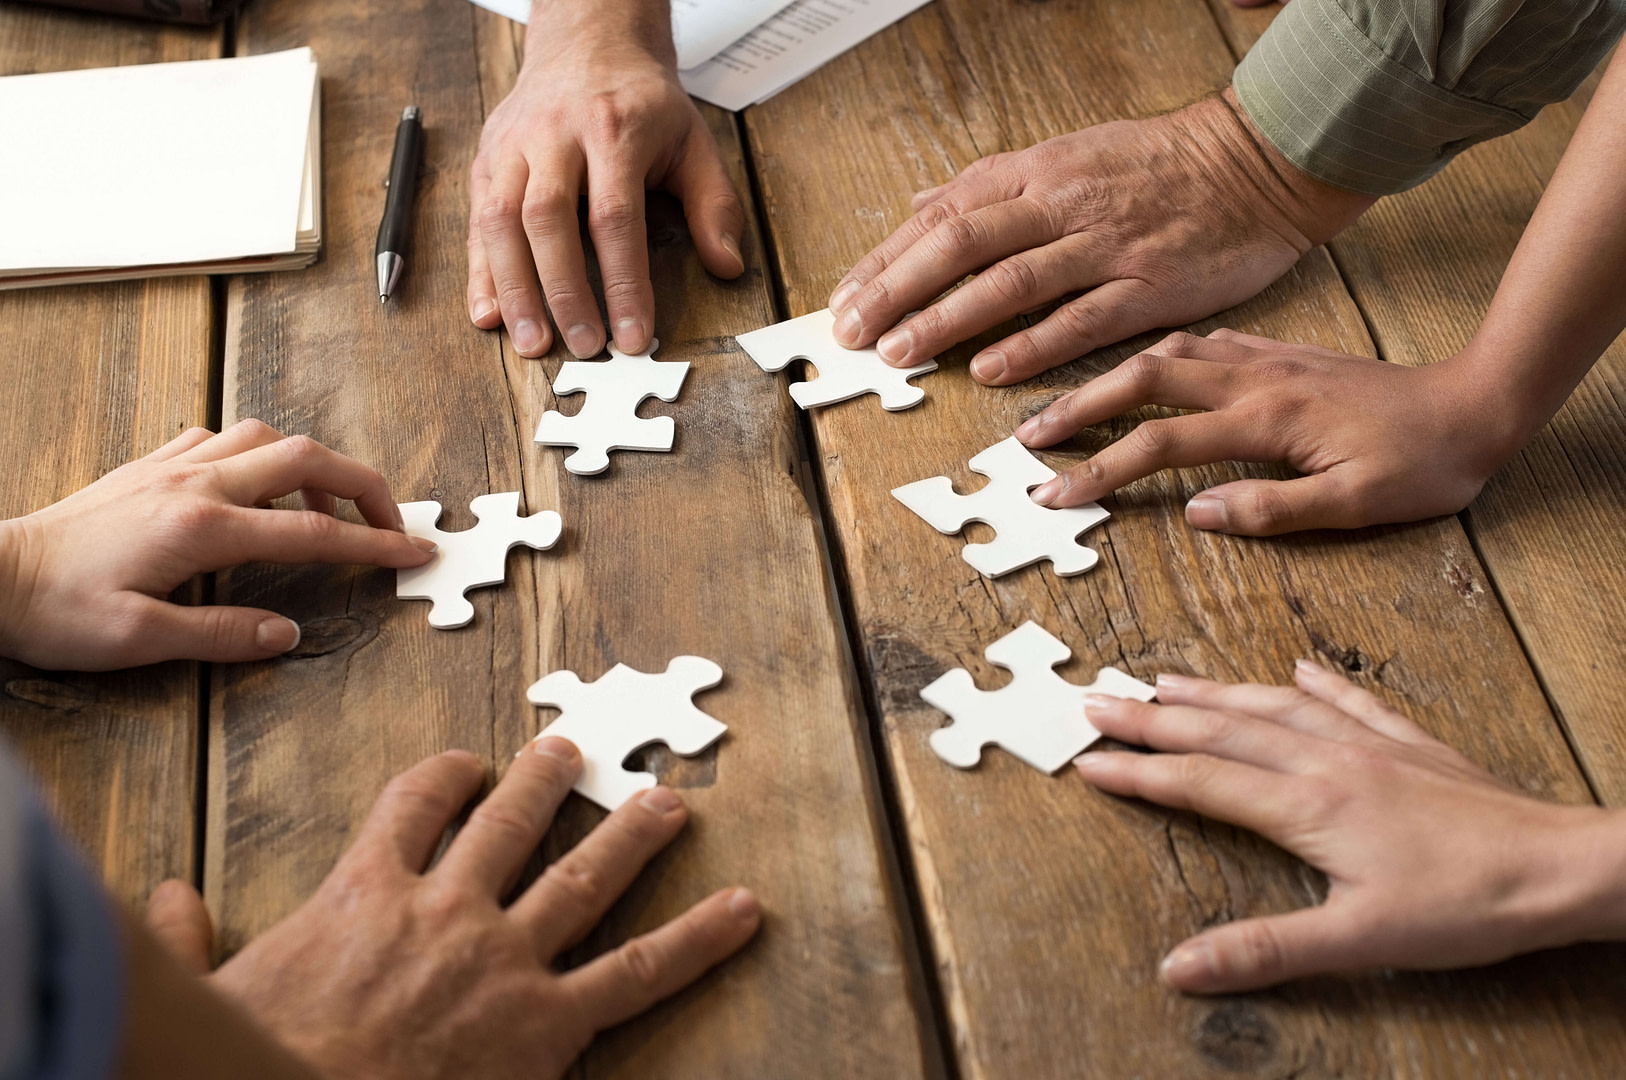 The hands of 6 different people are holding 1 piece of jigsaw puzzle each, in a circle on a table.